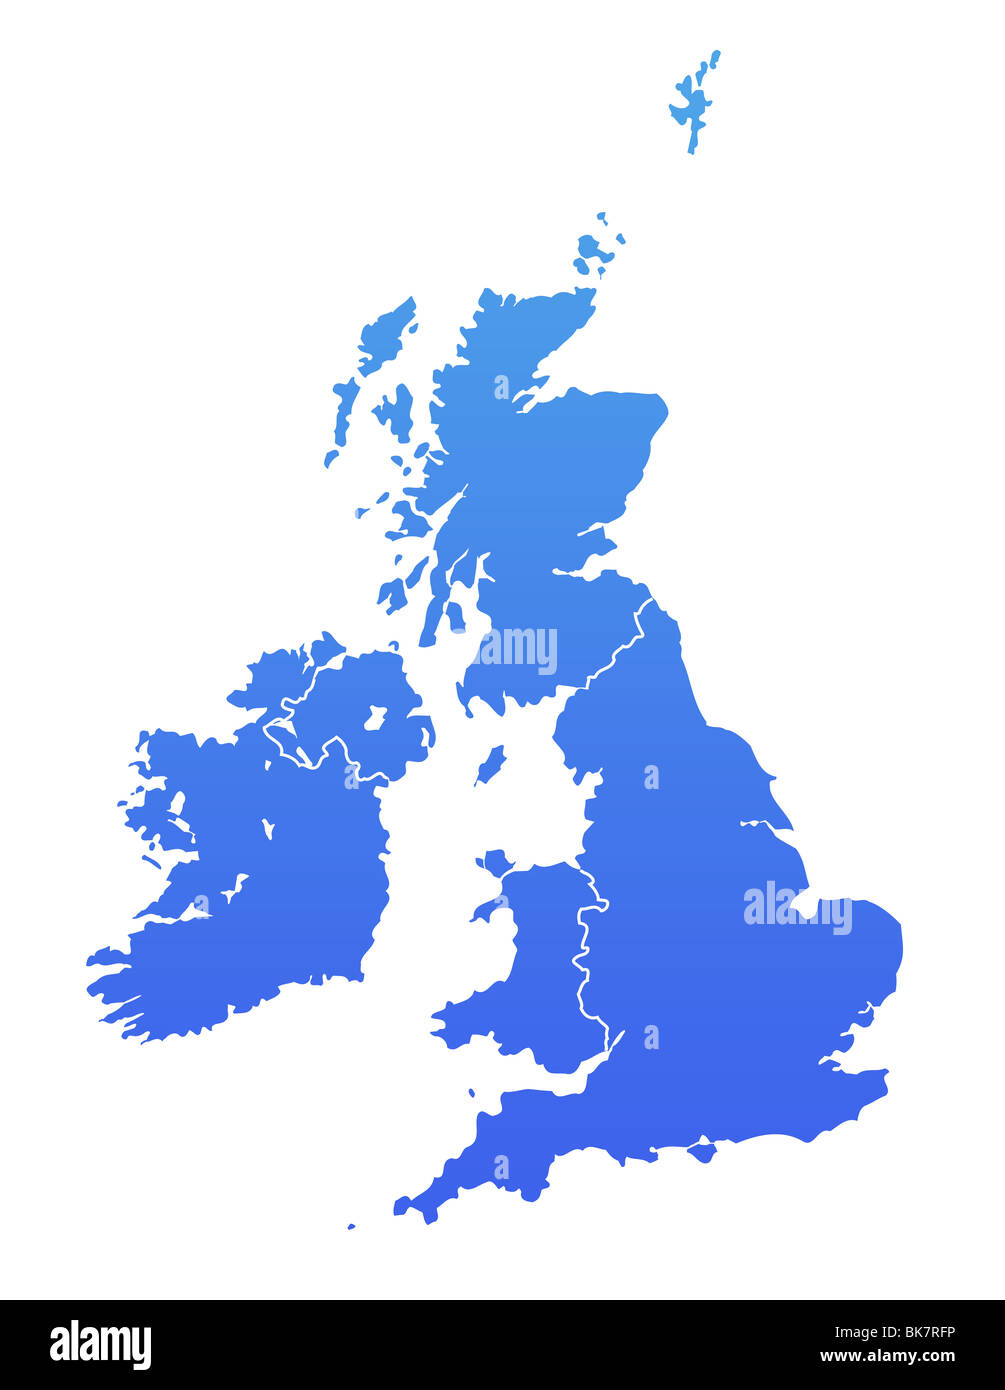 United Kingdom map in gradient blue, isolated on white background. Stock Photo